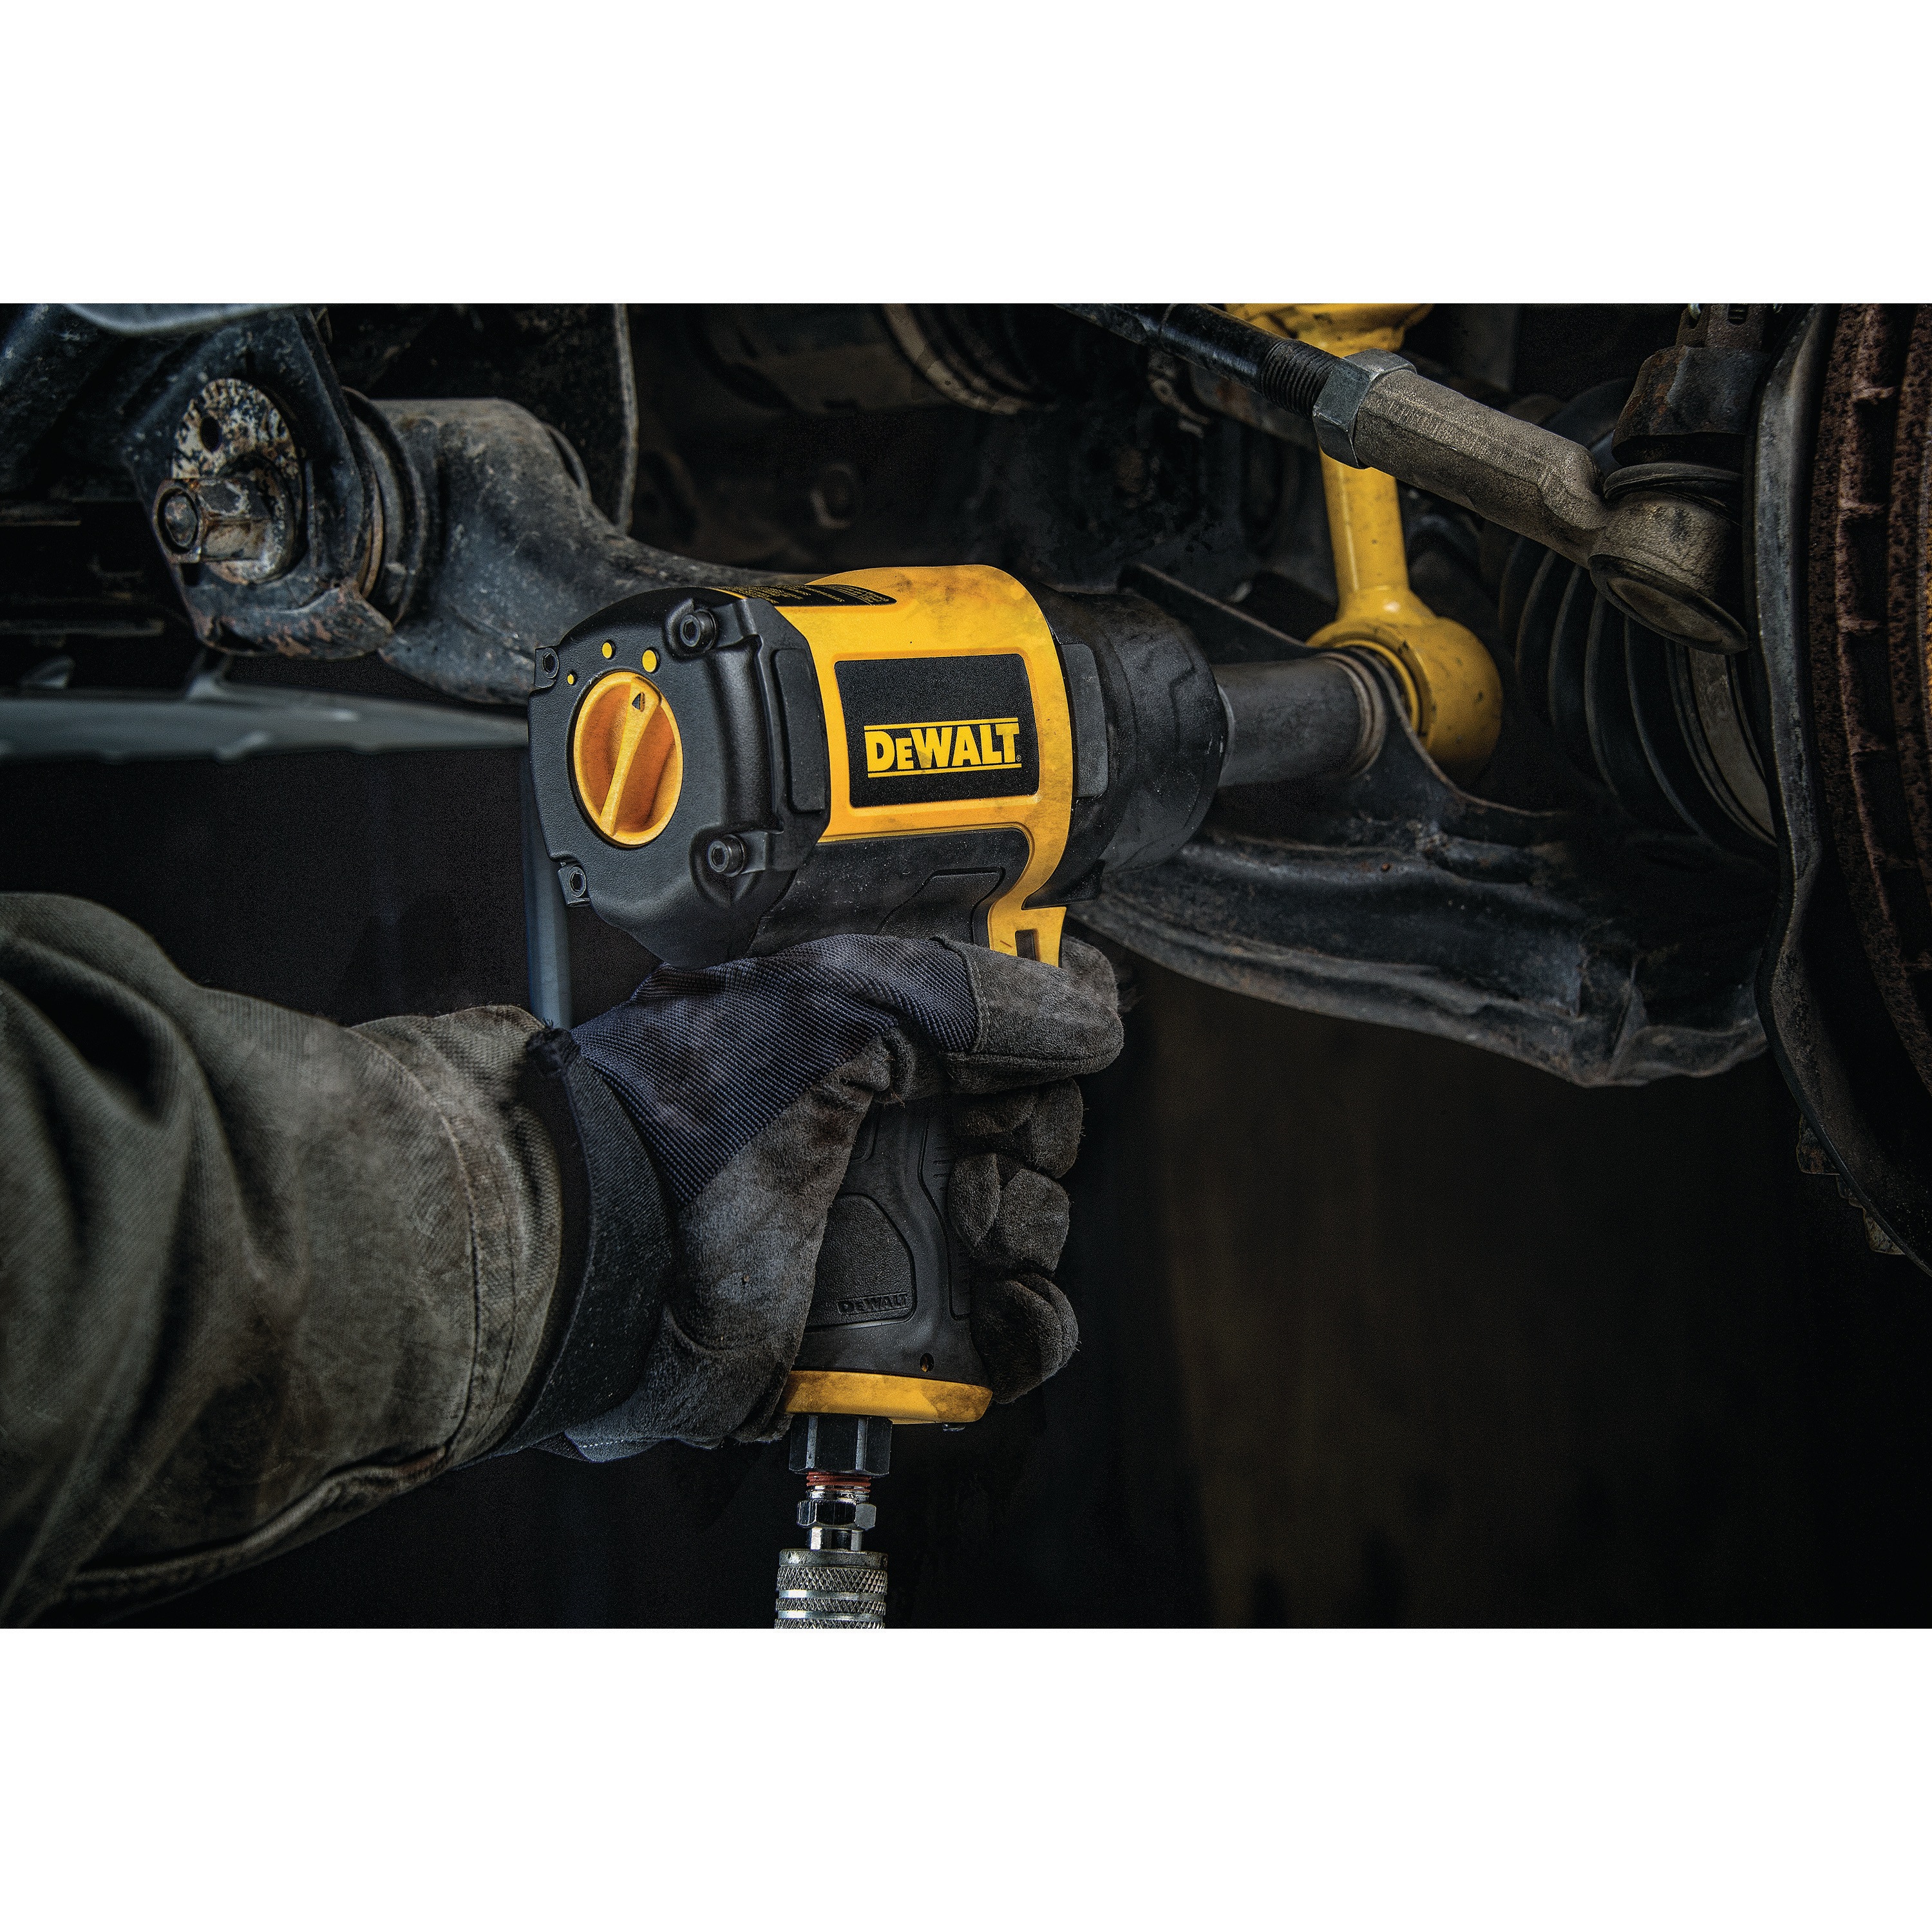 DEWALT half inch heavy duty drive impact wrench being used by a person. 